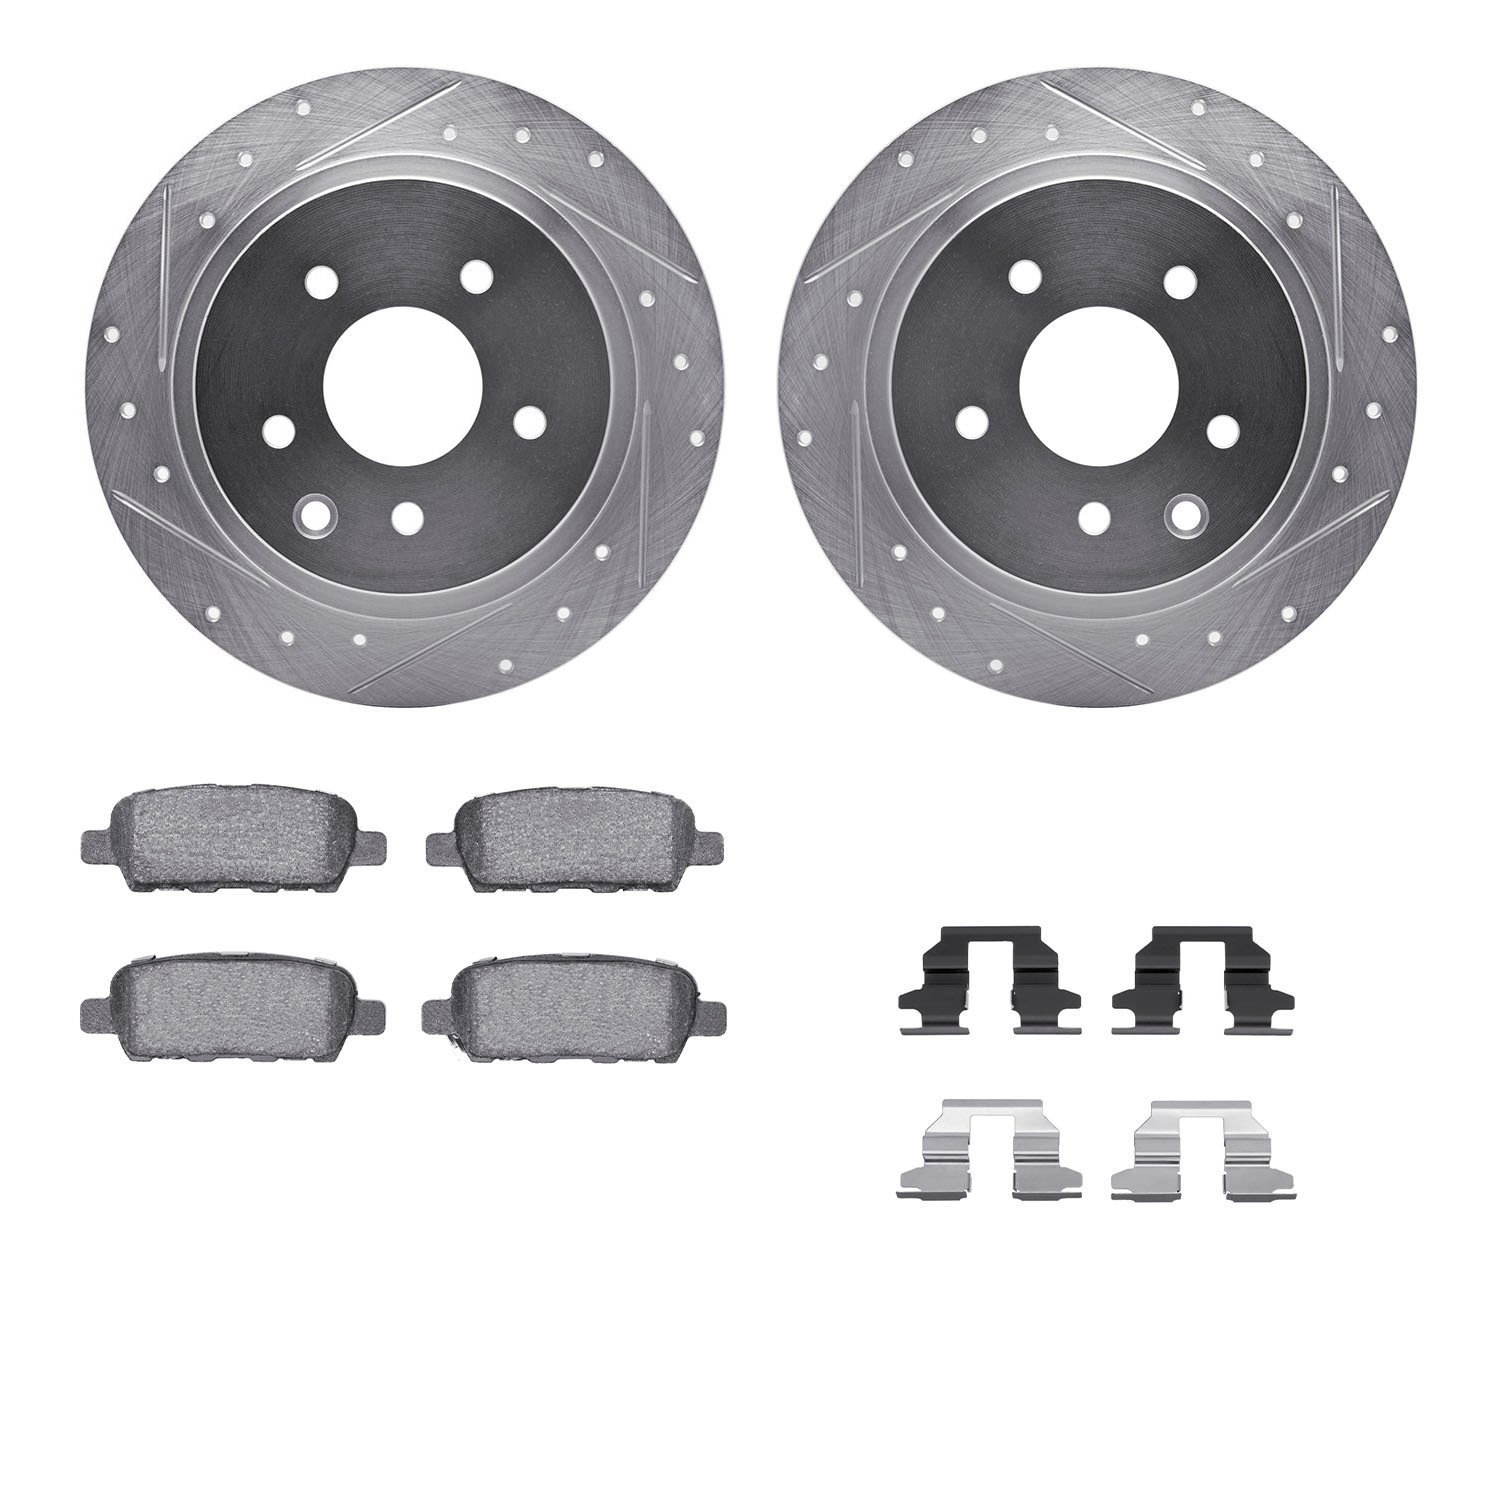 7312-67098 Drilled/Slotted Brake Rotor with 3000-Series Ceramic Brake Pads Kit & Hardware [Silver], Fits Select Multiple Makes/M